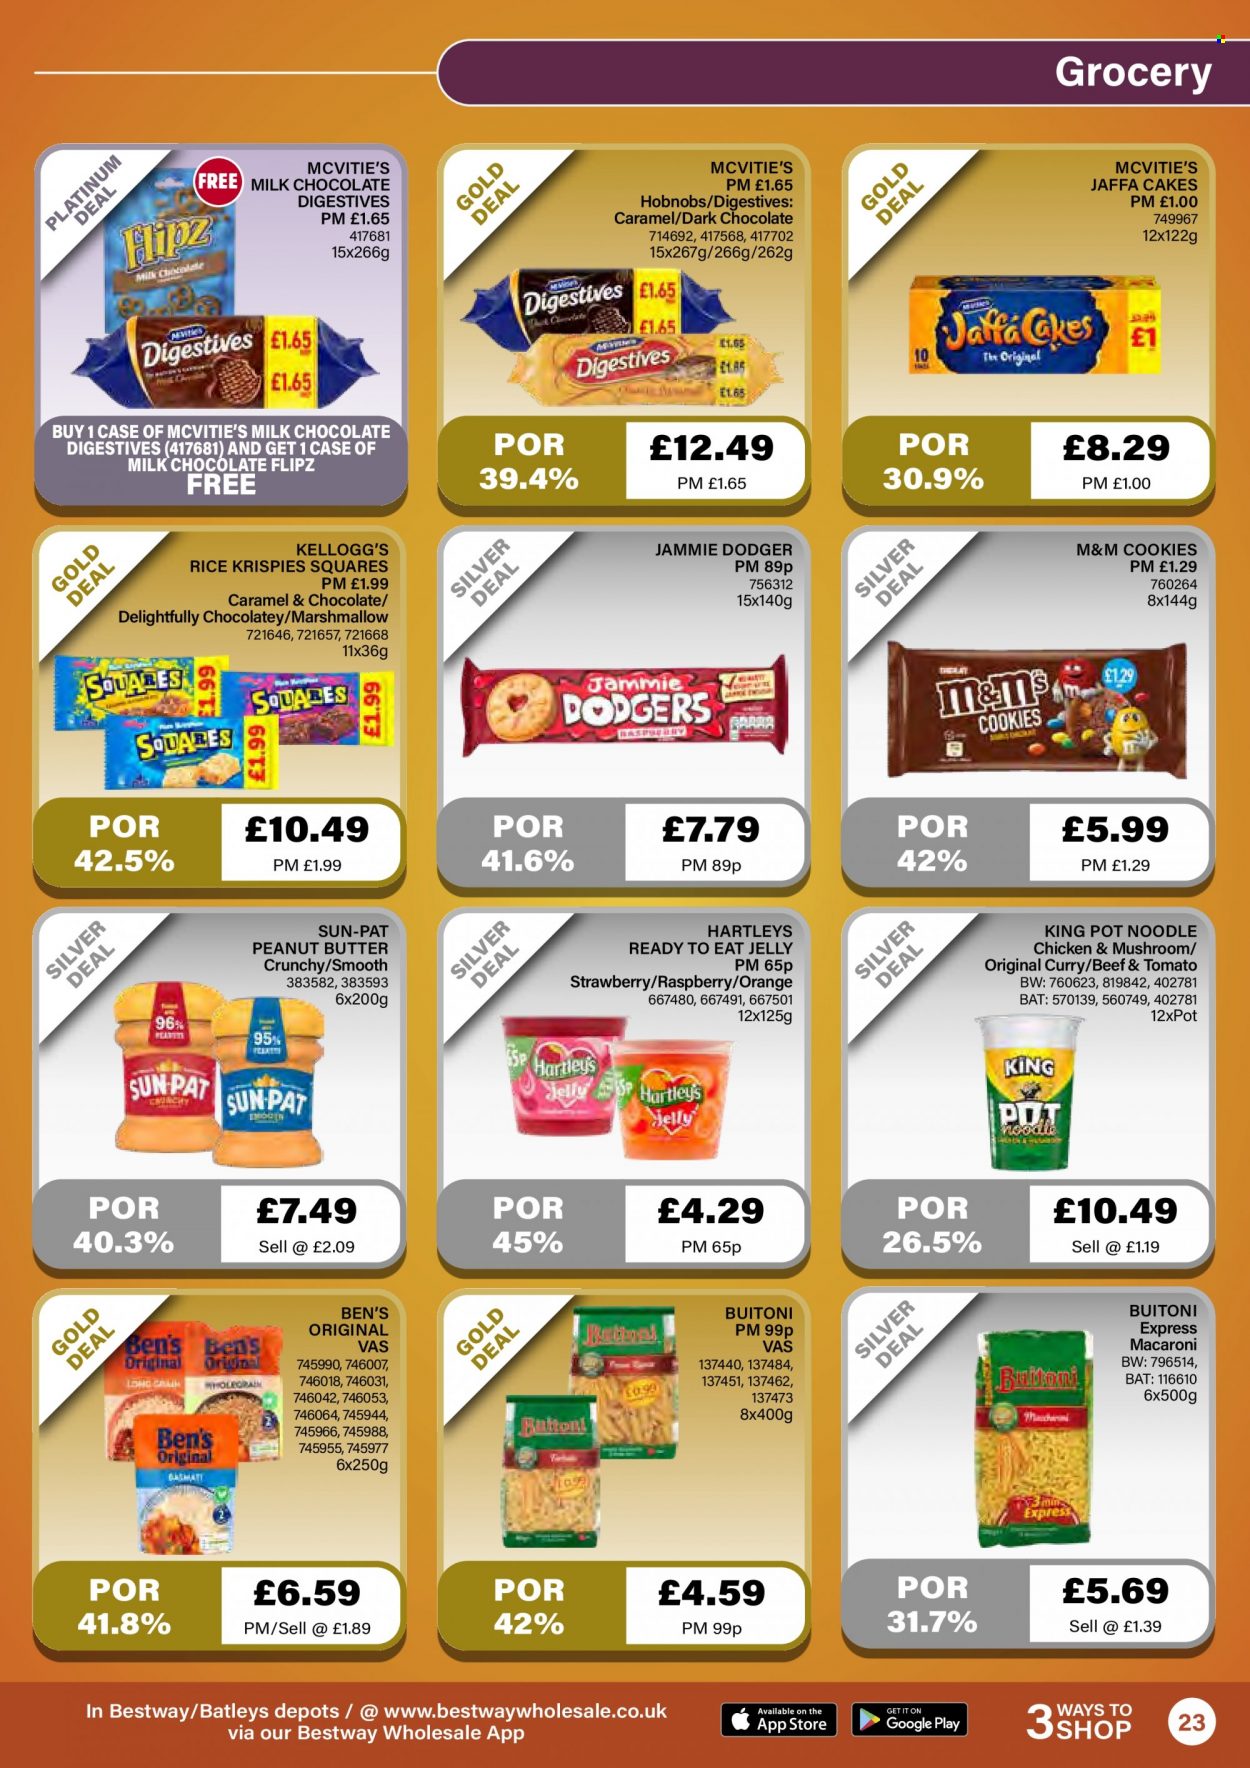 thumbnail - Bestway offer  - 08/10/2021 - 04/11/2021 - Sales products - oranges, cake, noodles, macaroni, Buitoni, cookies, marshmallows, milk chocolate, chocolate, M&M's, jelly, Kellogg's, dark chocolate, Rice Krispies, caramel, peanut butter, pot. Page 23.